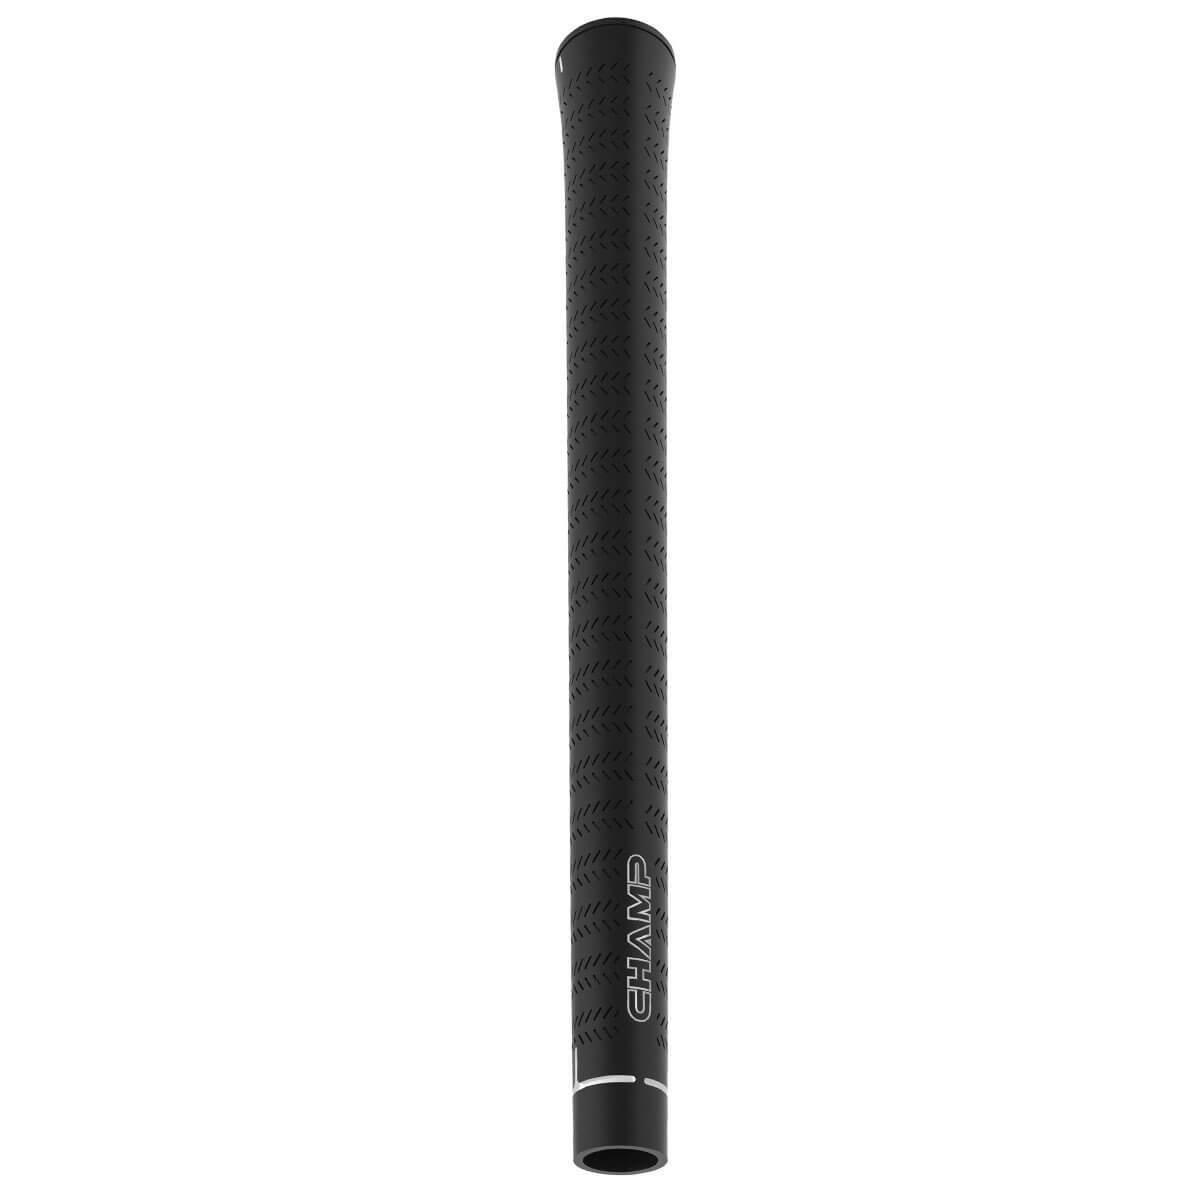 Champ C2X Soft Feel Golf Grip In India | golfedge  | India’s Favourite Online Golf Store | golfedgeindia.com